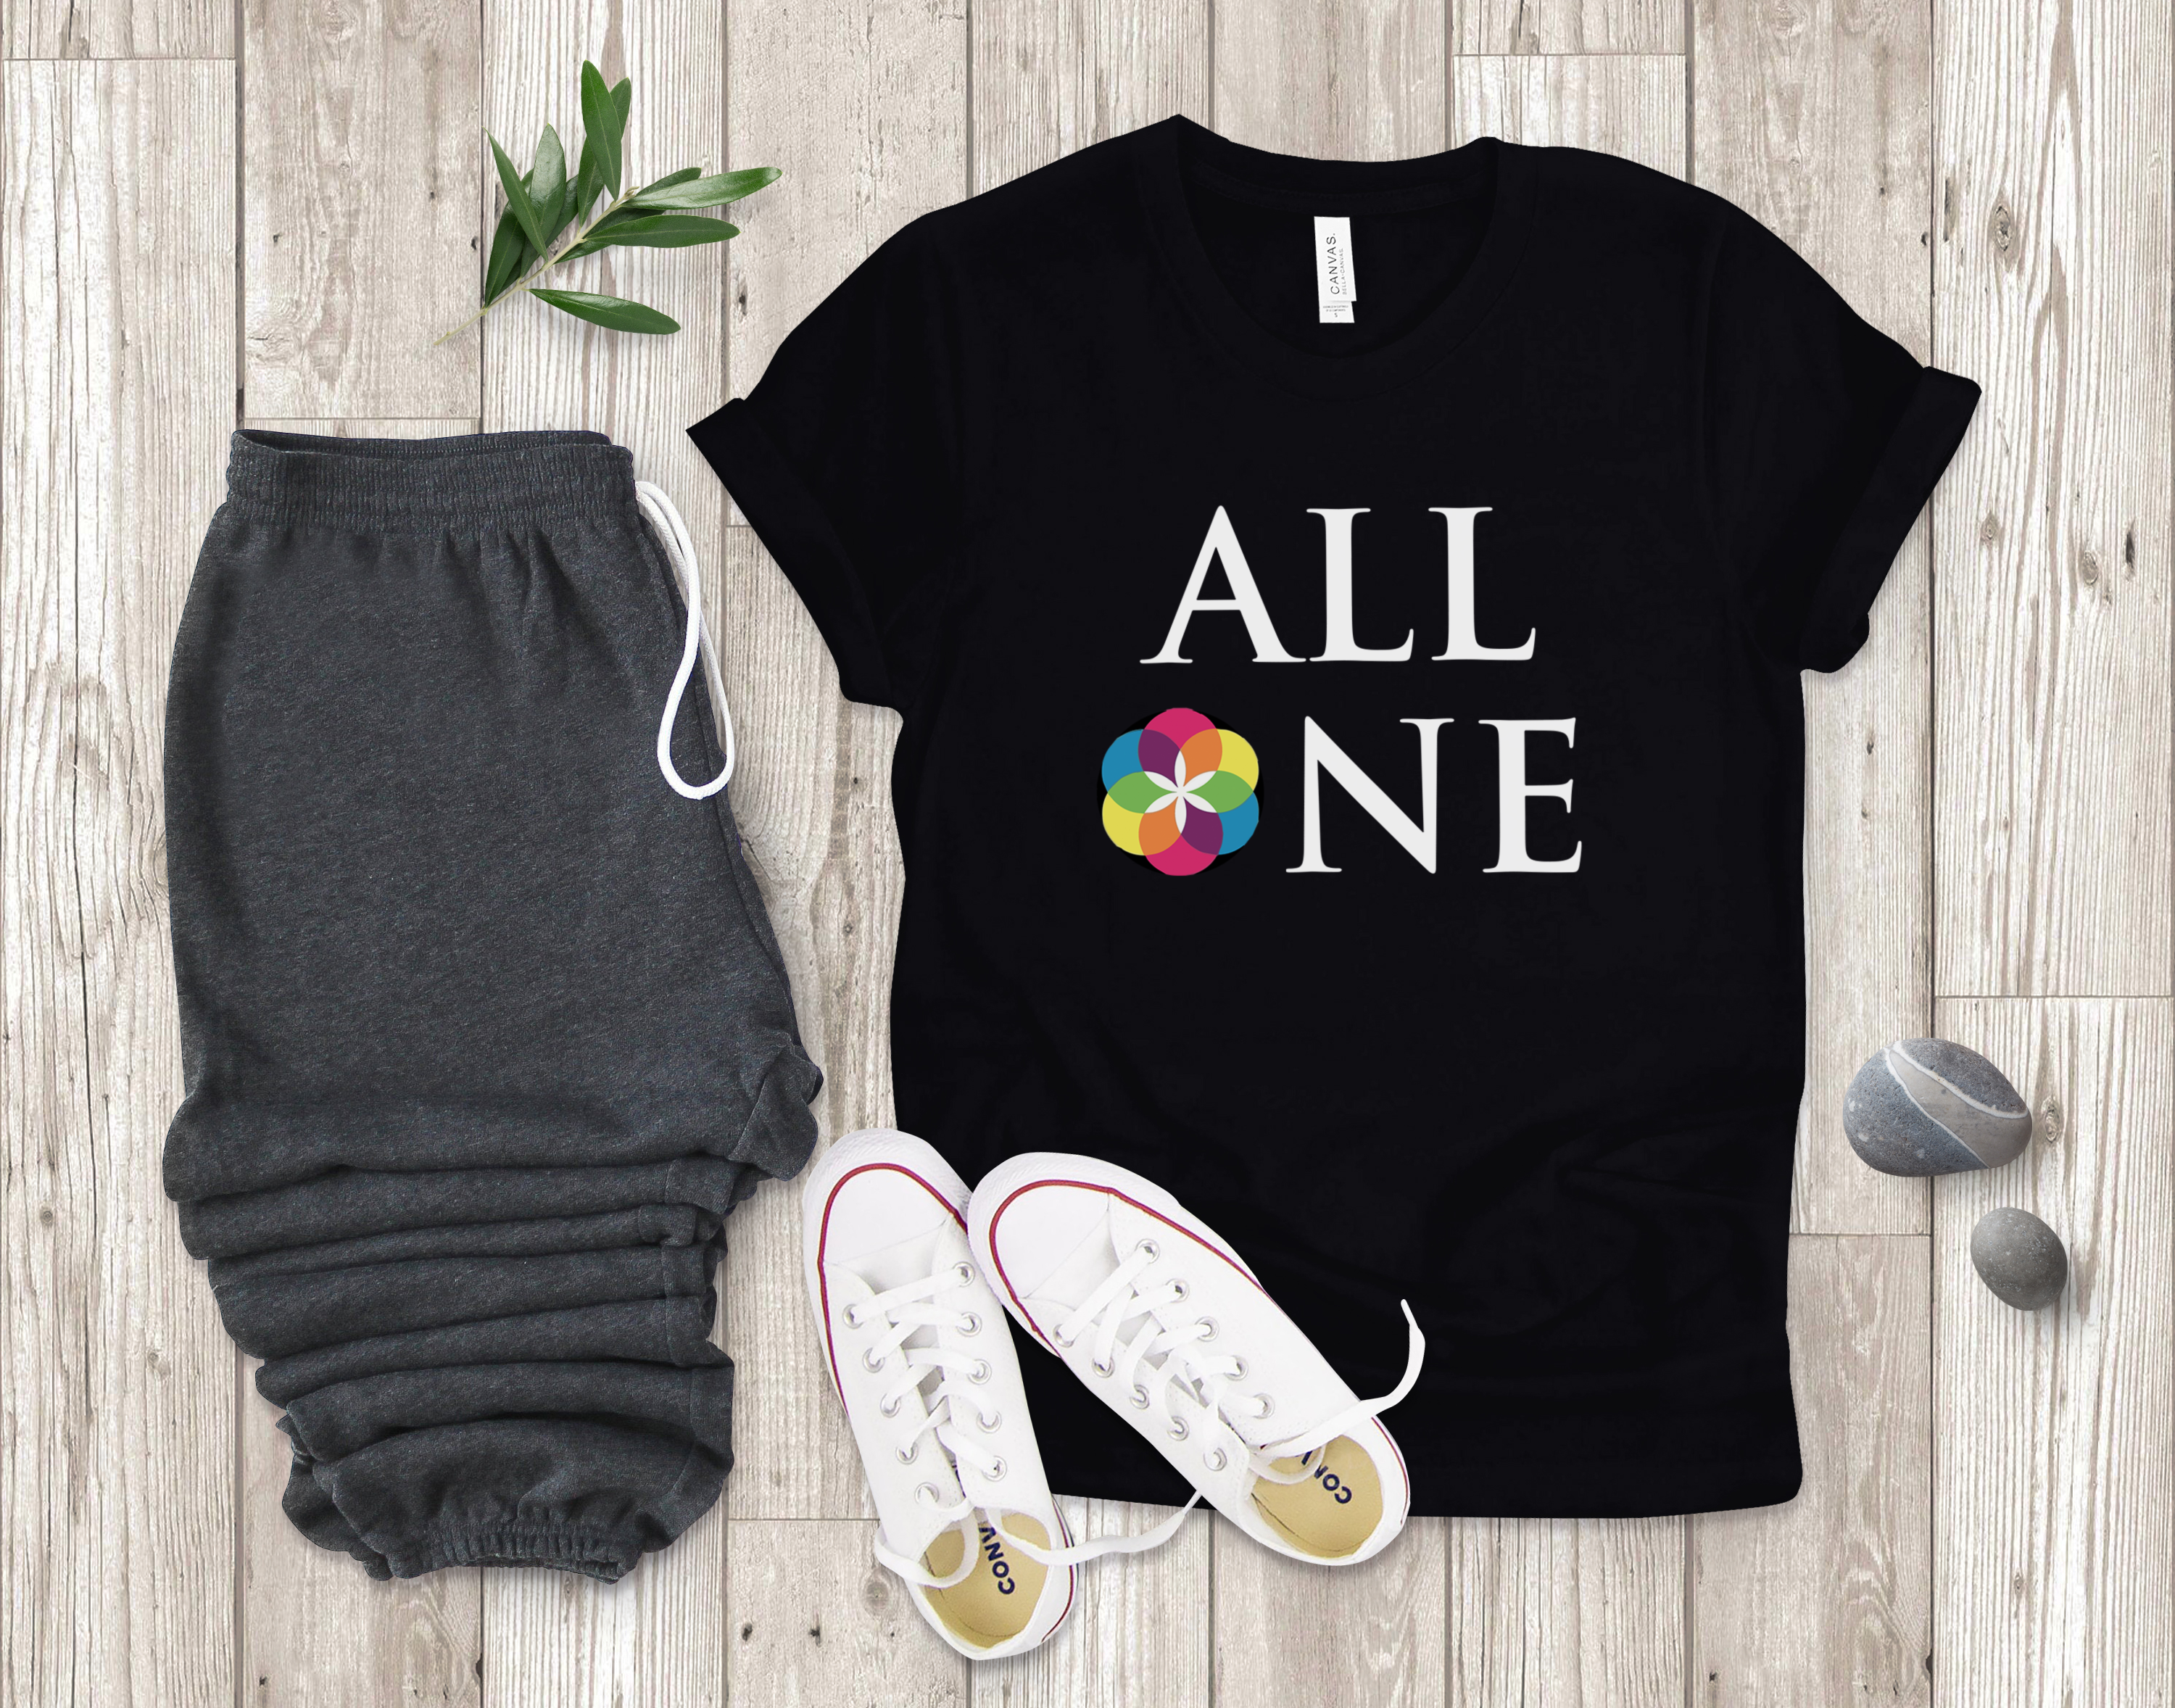 T-Shirts with Positive Sayings